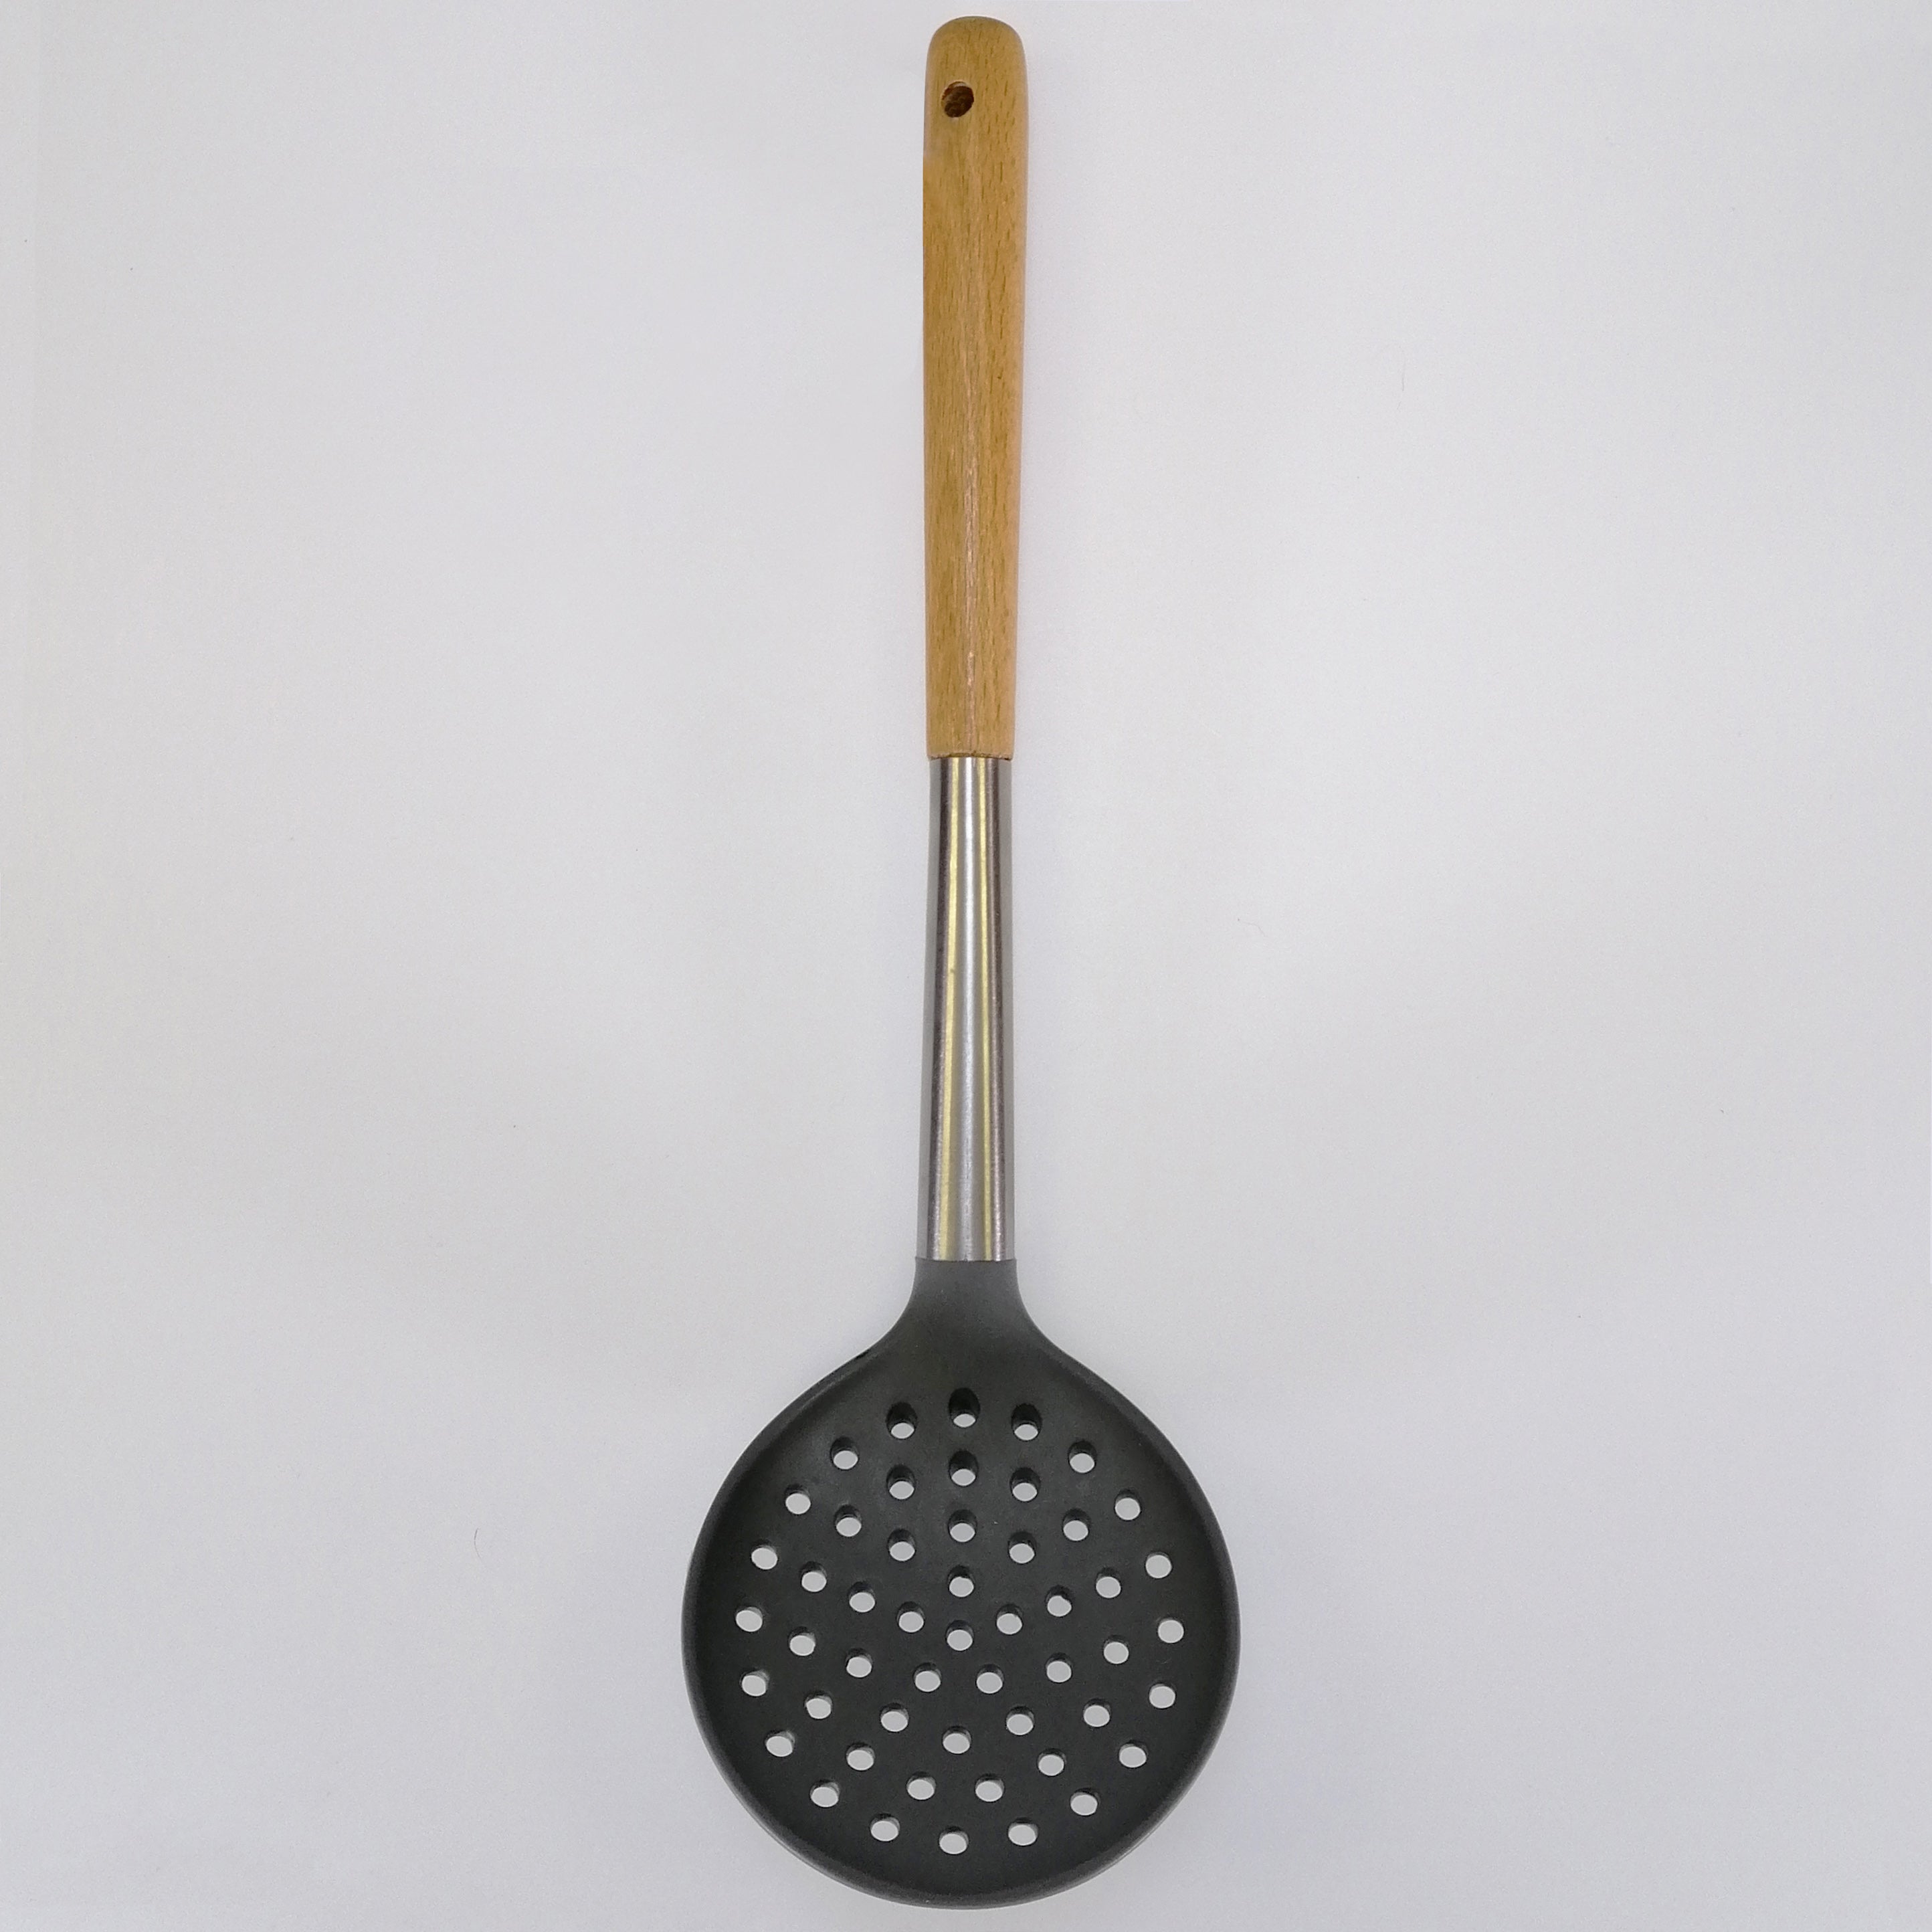 Cookstyle Pasta Strain Serving Spoon